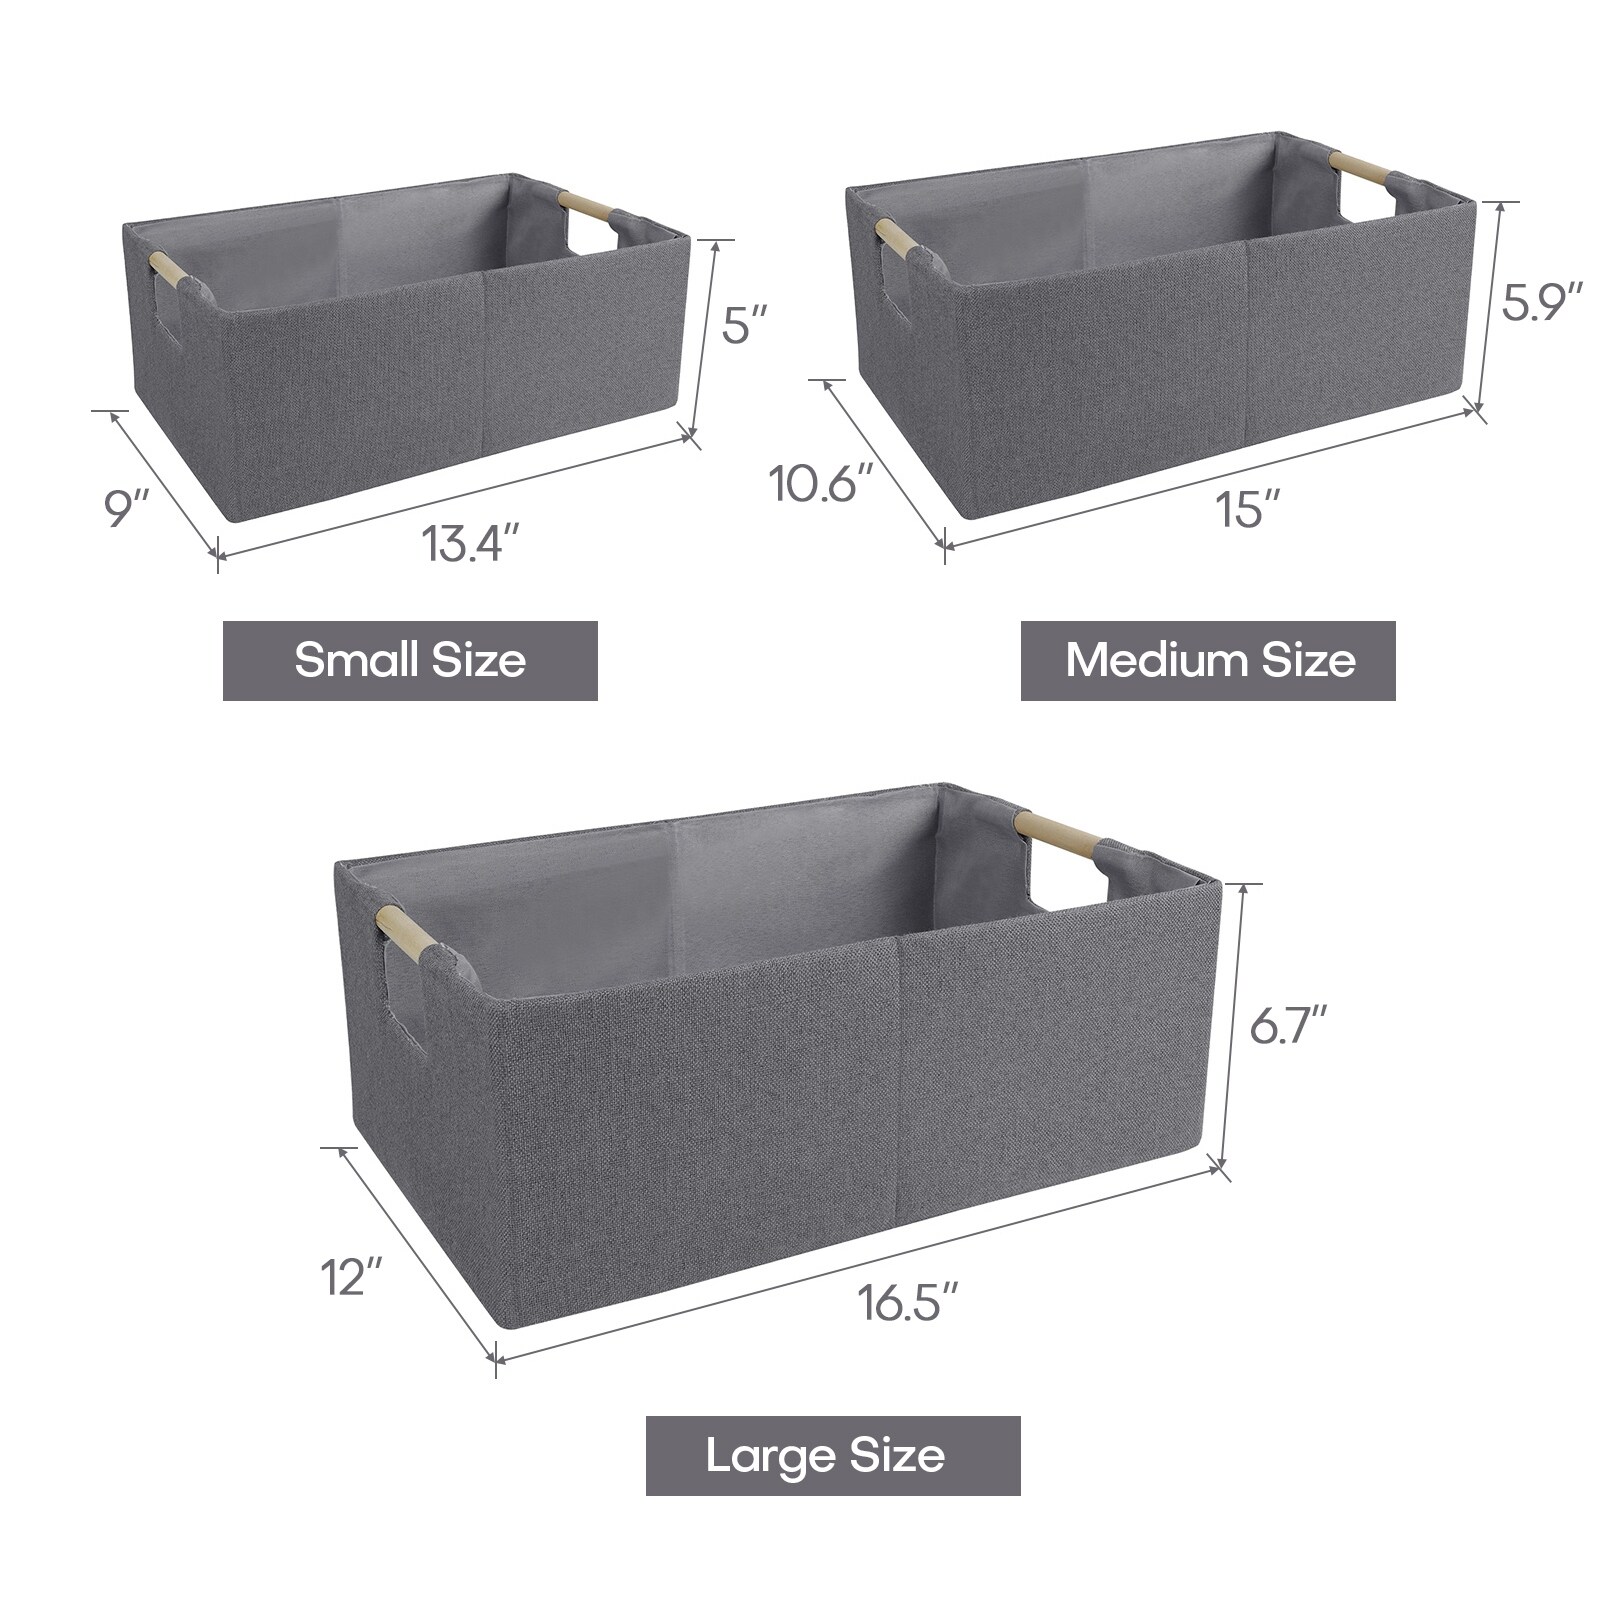 https://ak1.ostkcdn.com/images/products/is/images/direct/370afa7122a0f5d9a9684be170290aa1dfaa4746/Fabric-Foldable-Storage-Bins-Organizer-Container-W-Wood-Handles-2Pcs.jpg